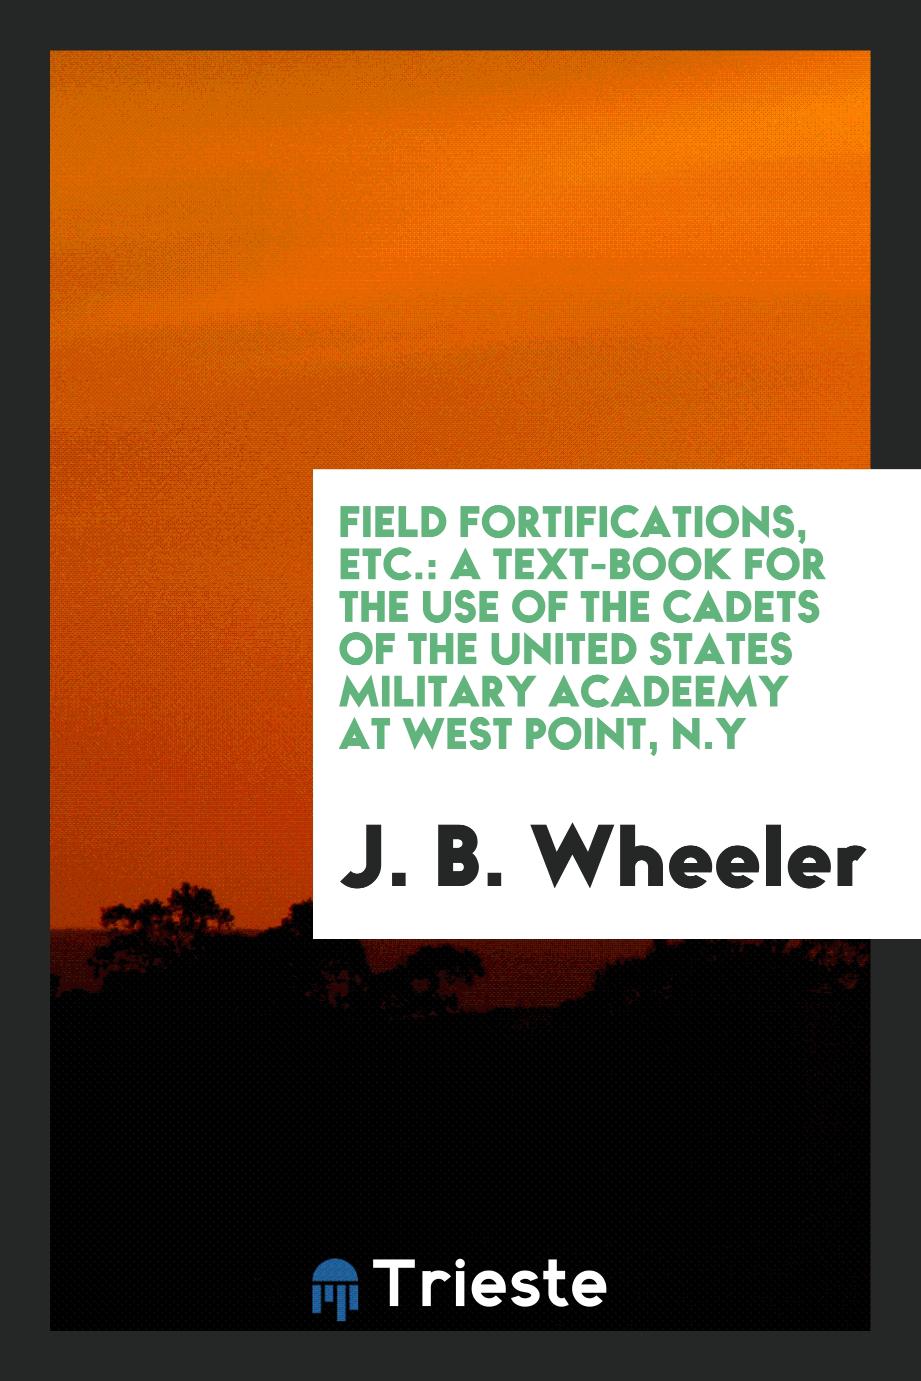 Field fortifications, etc.: a text-book for the use of the cadets of the United States military acadeemy at West Point, N.Y